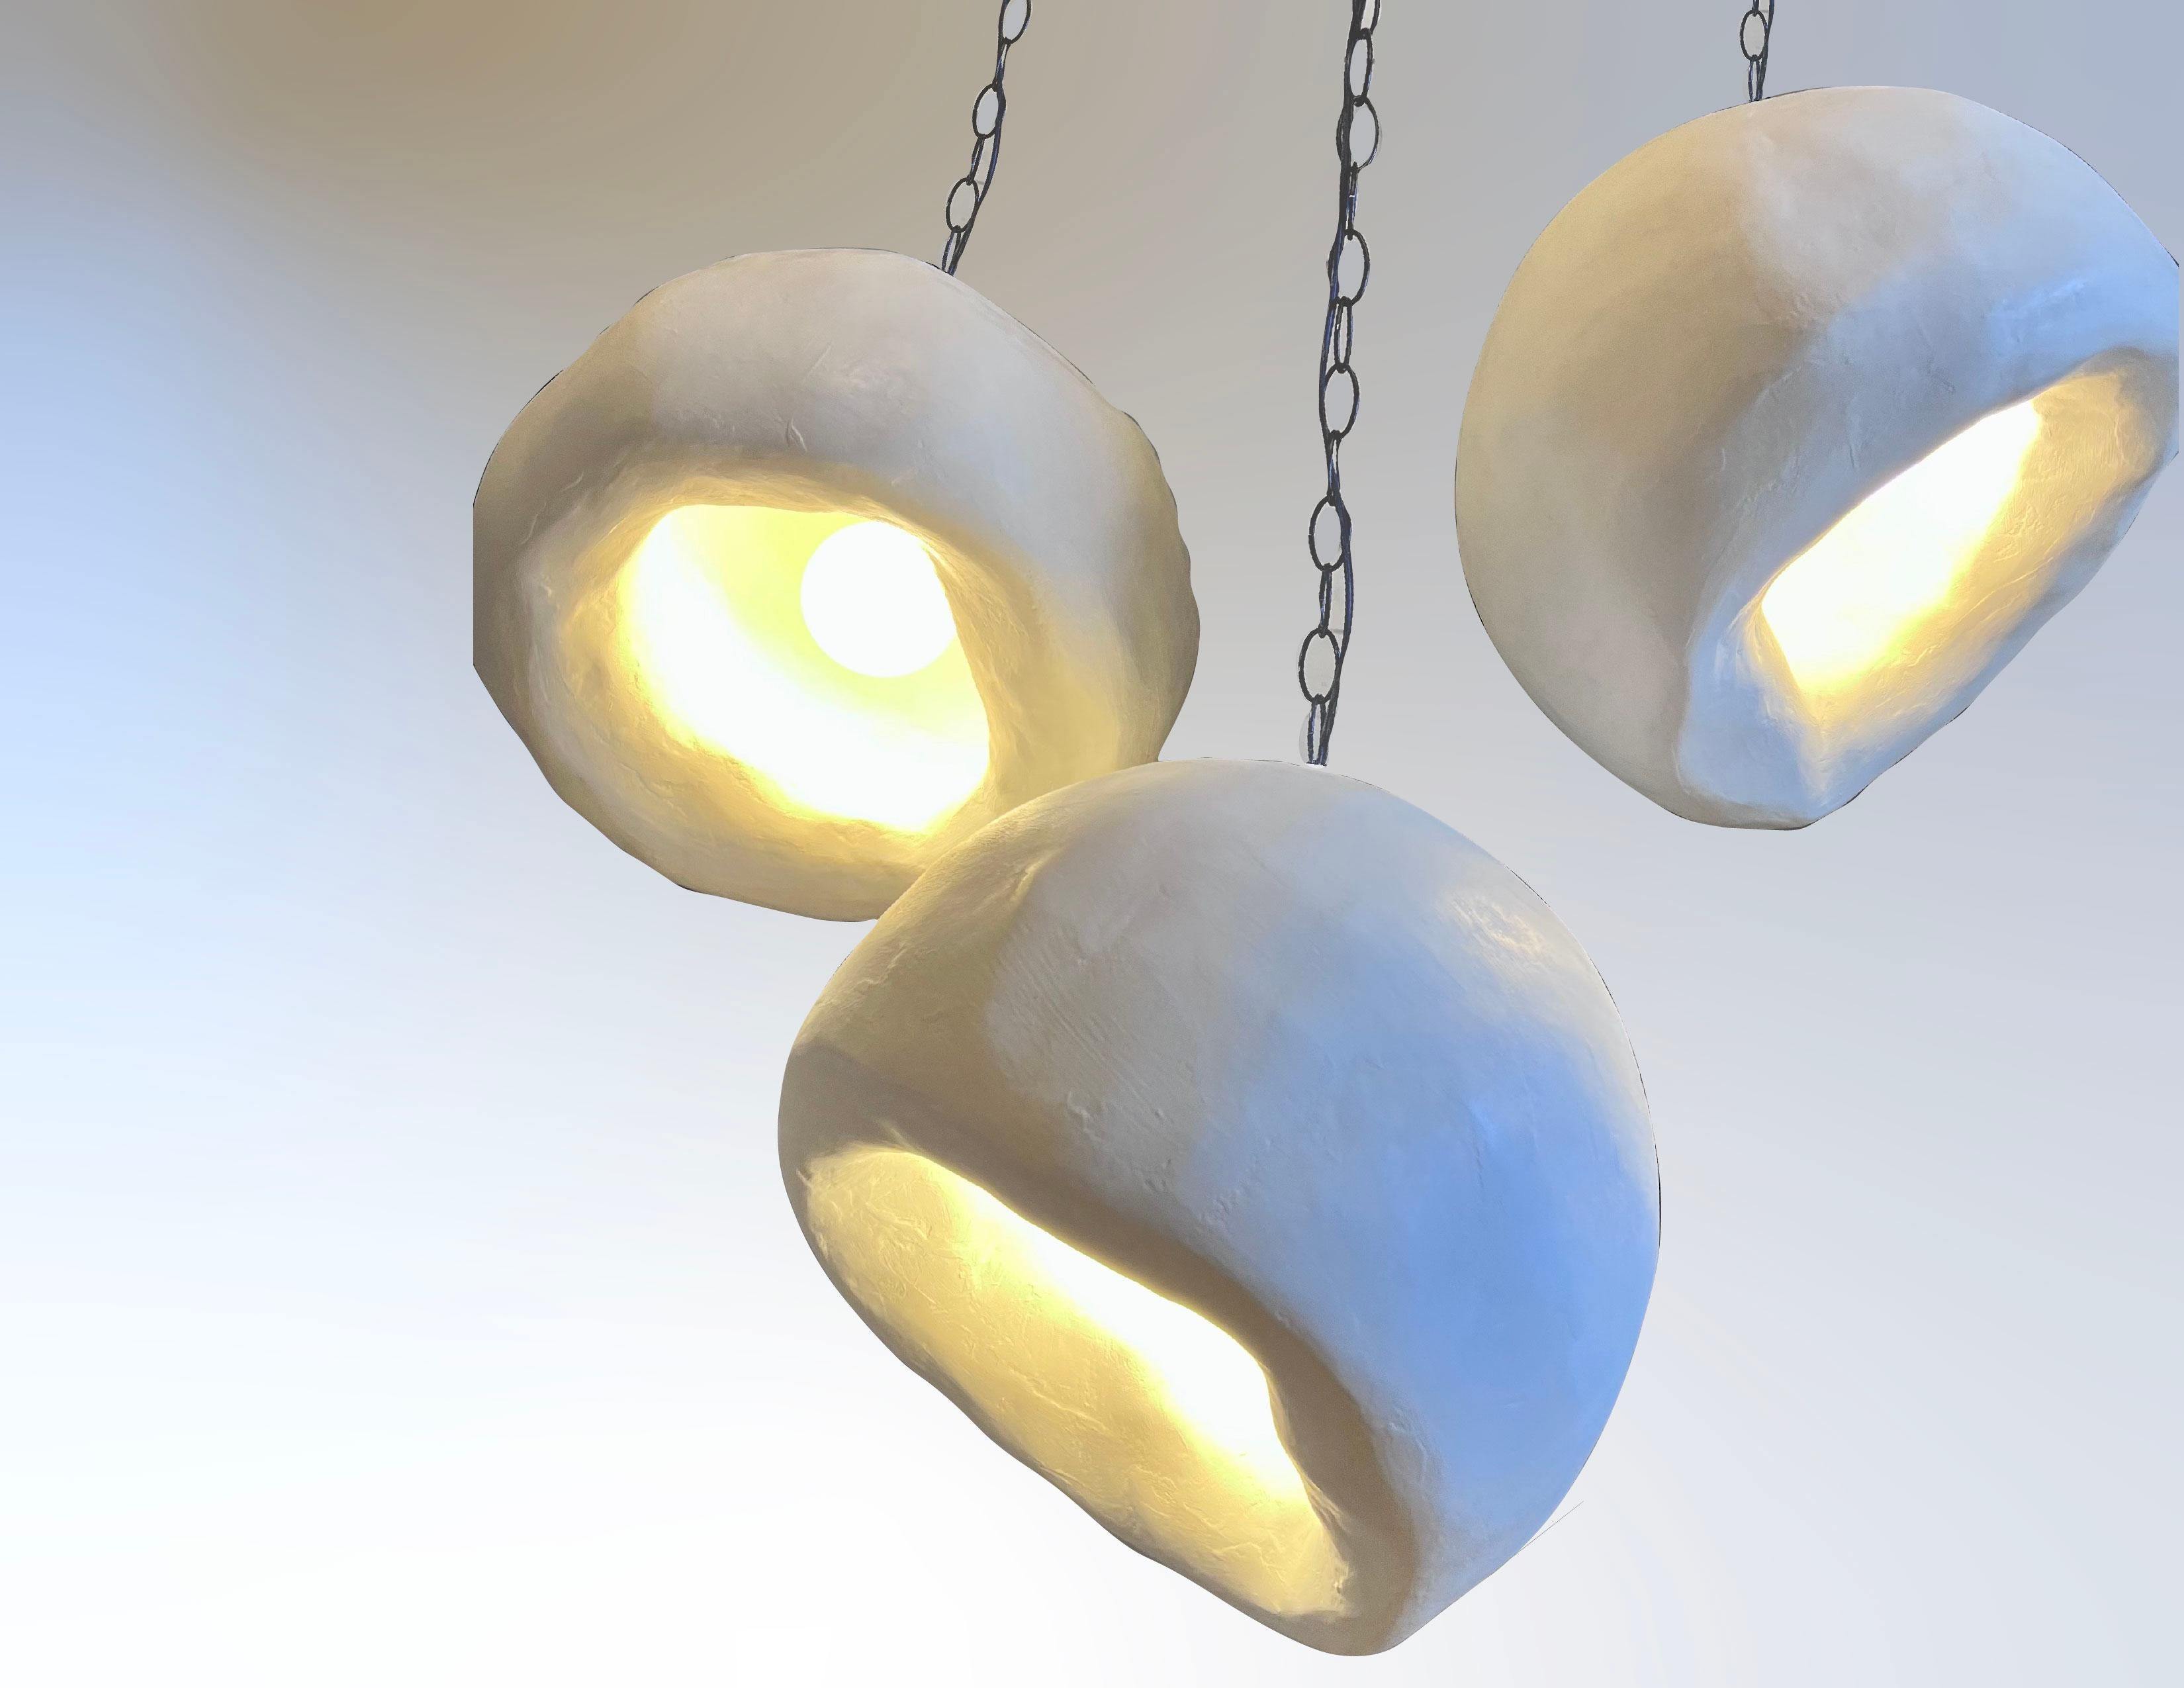 Carved Biomorphic Pendant by Studio Chora, Organic Hanging Light Fixture, Made-to-order For Sale